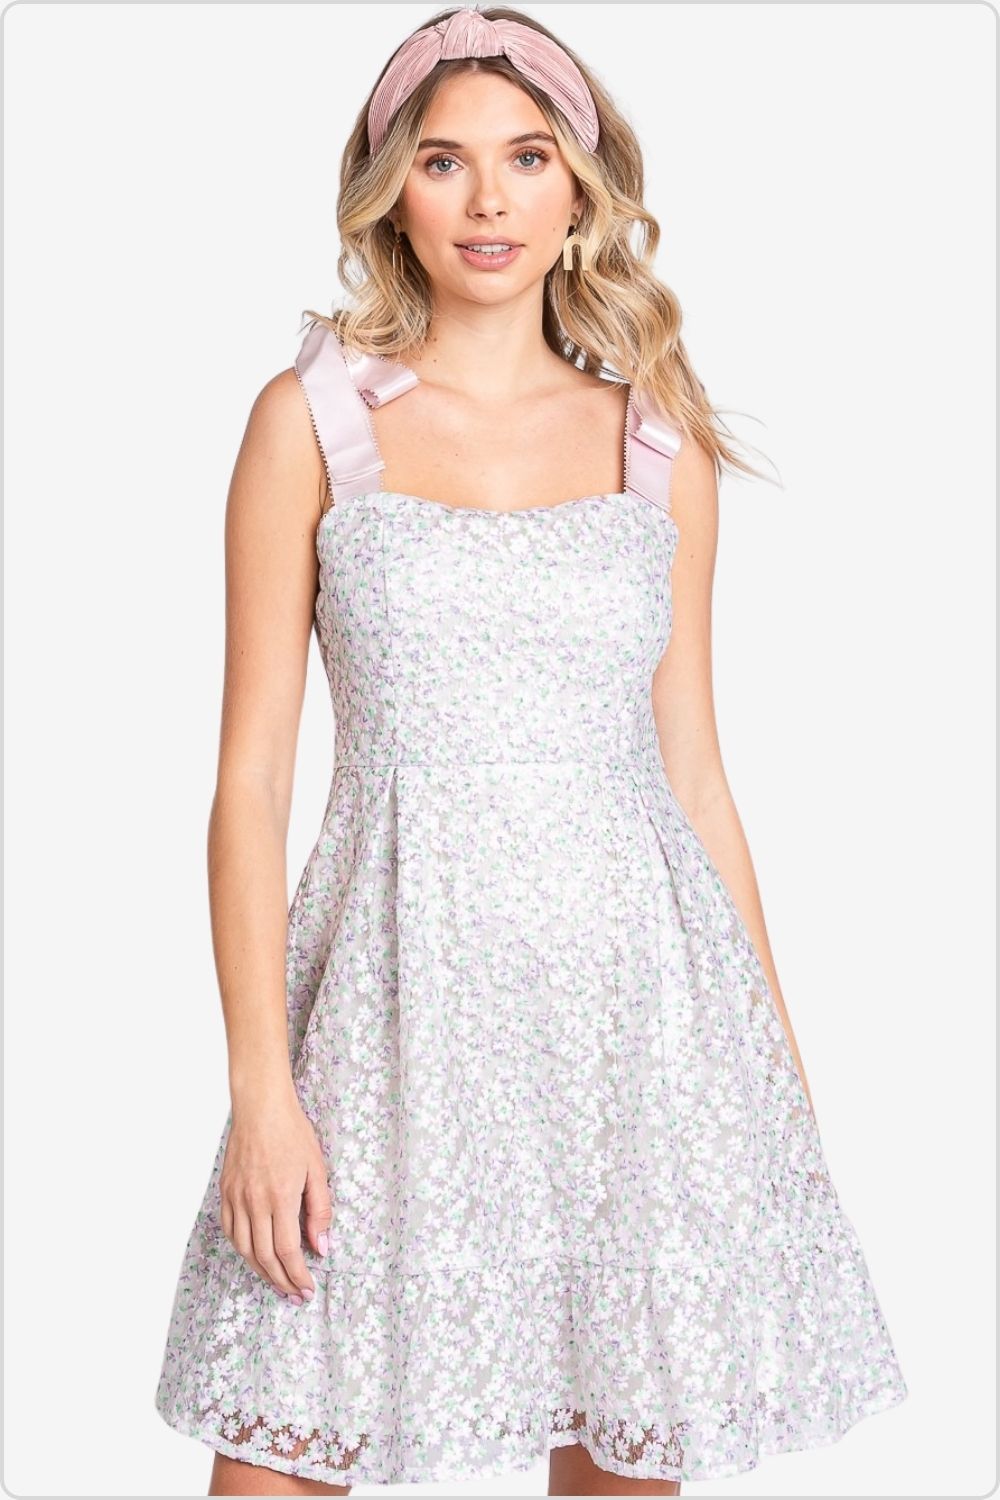 Woman in sleeveless mesh dress with delicate floral embroidery and pink straps